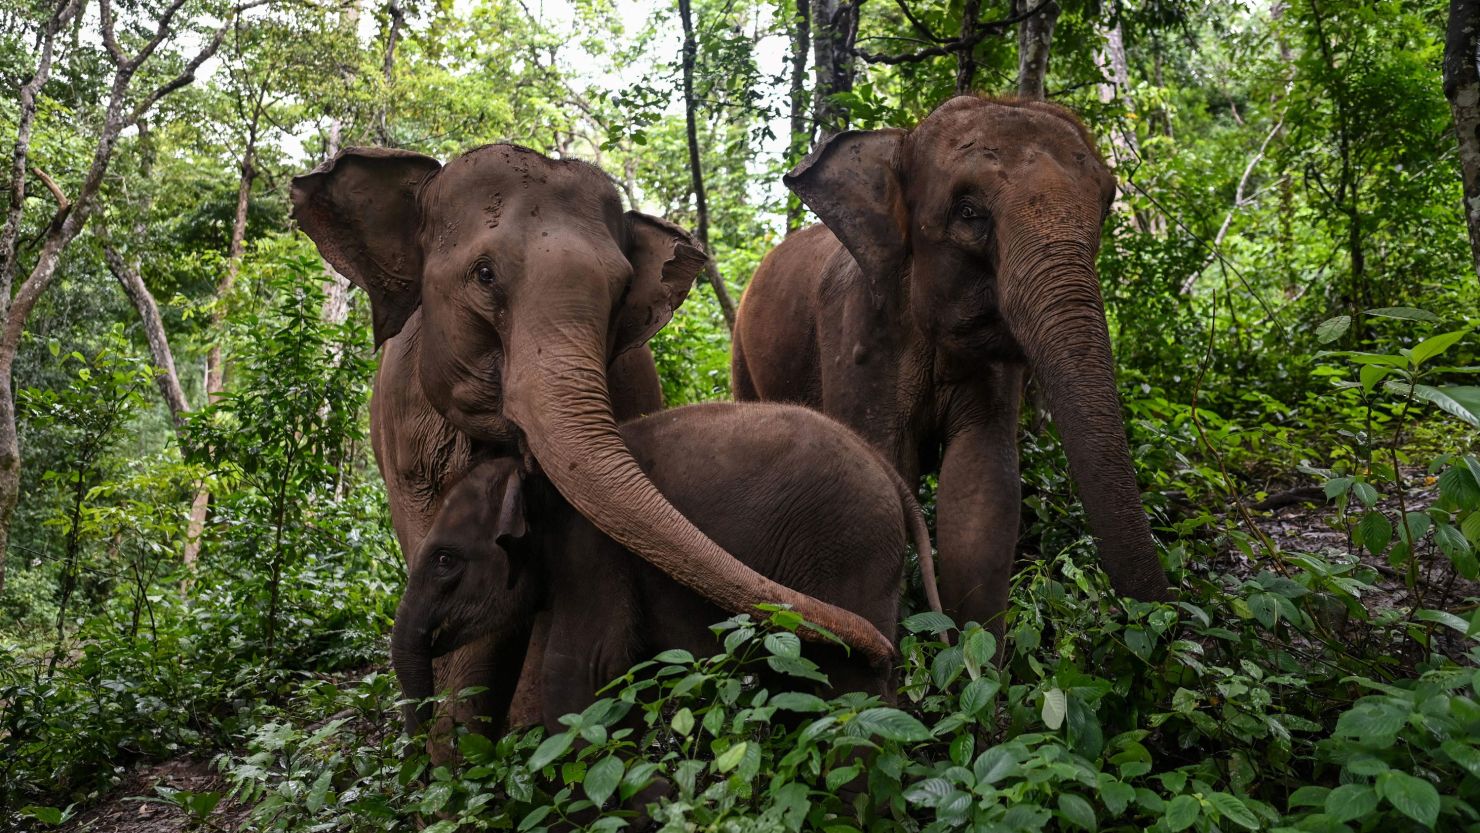 This photo taken on July 20, 2021 shows elephants eating in a forest at the Asian Elephant Breeding and Rescue Centre in Xishuangbanna, in southwest China's Yunnan province.